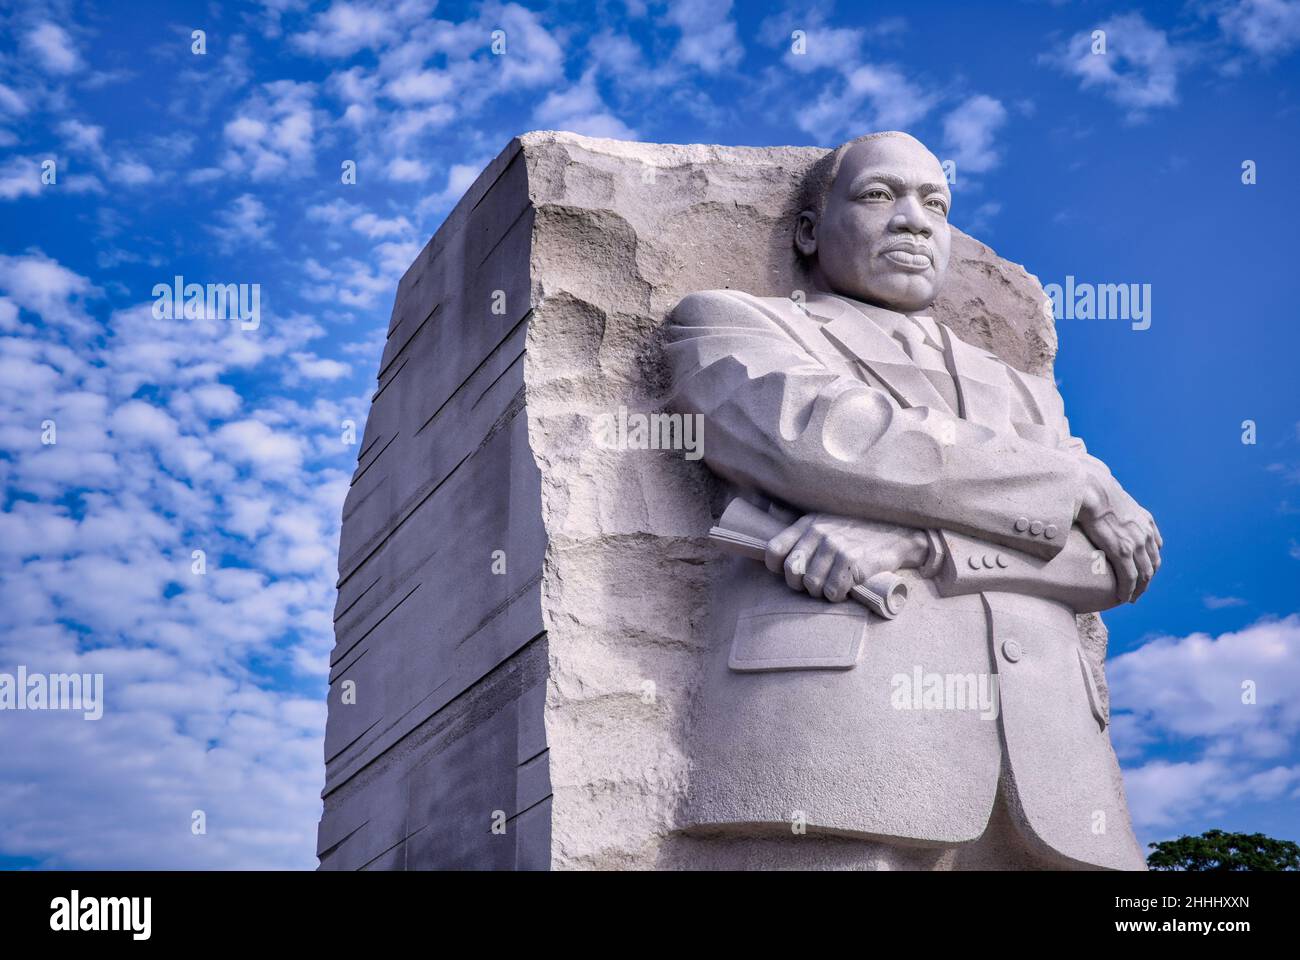 Washington DC, USA - October 15, 2021: The Martin Luther King Jr. Memorial on the National Mall in Washington DC. Stock Photo